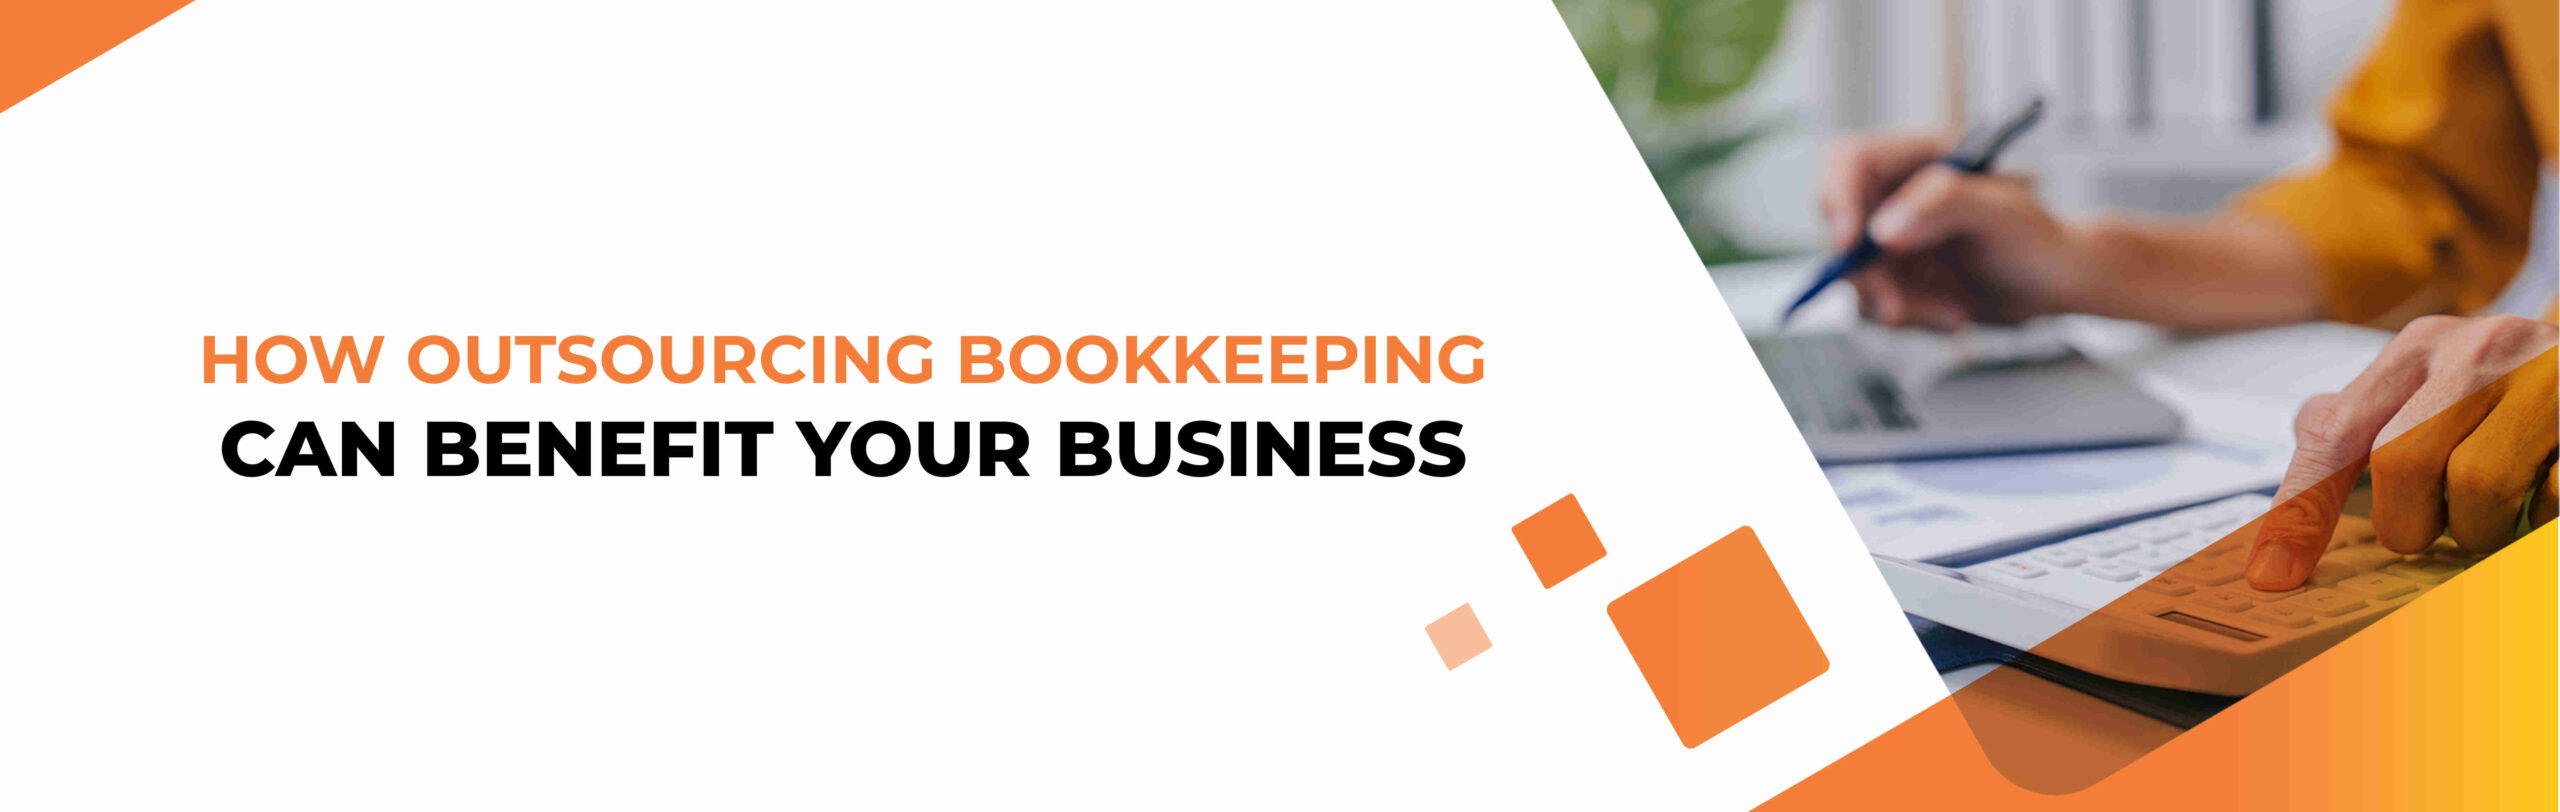 How Outsourcing Bookkeeping Can Benefit Your Business